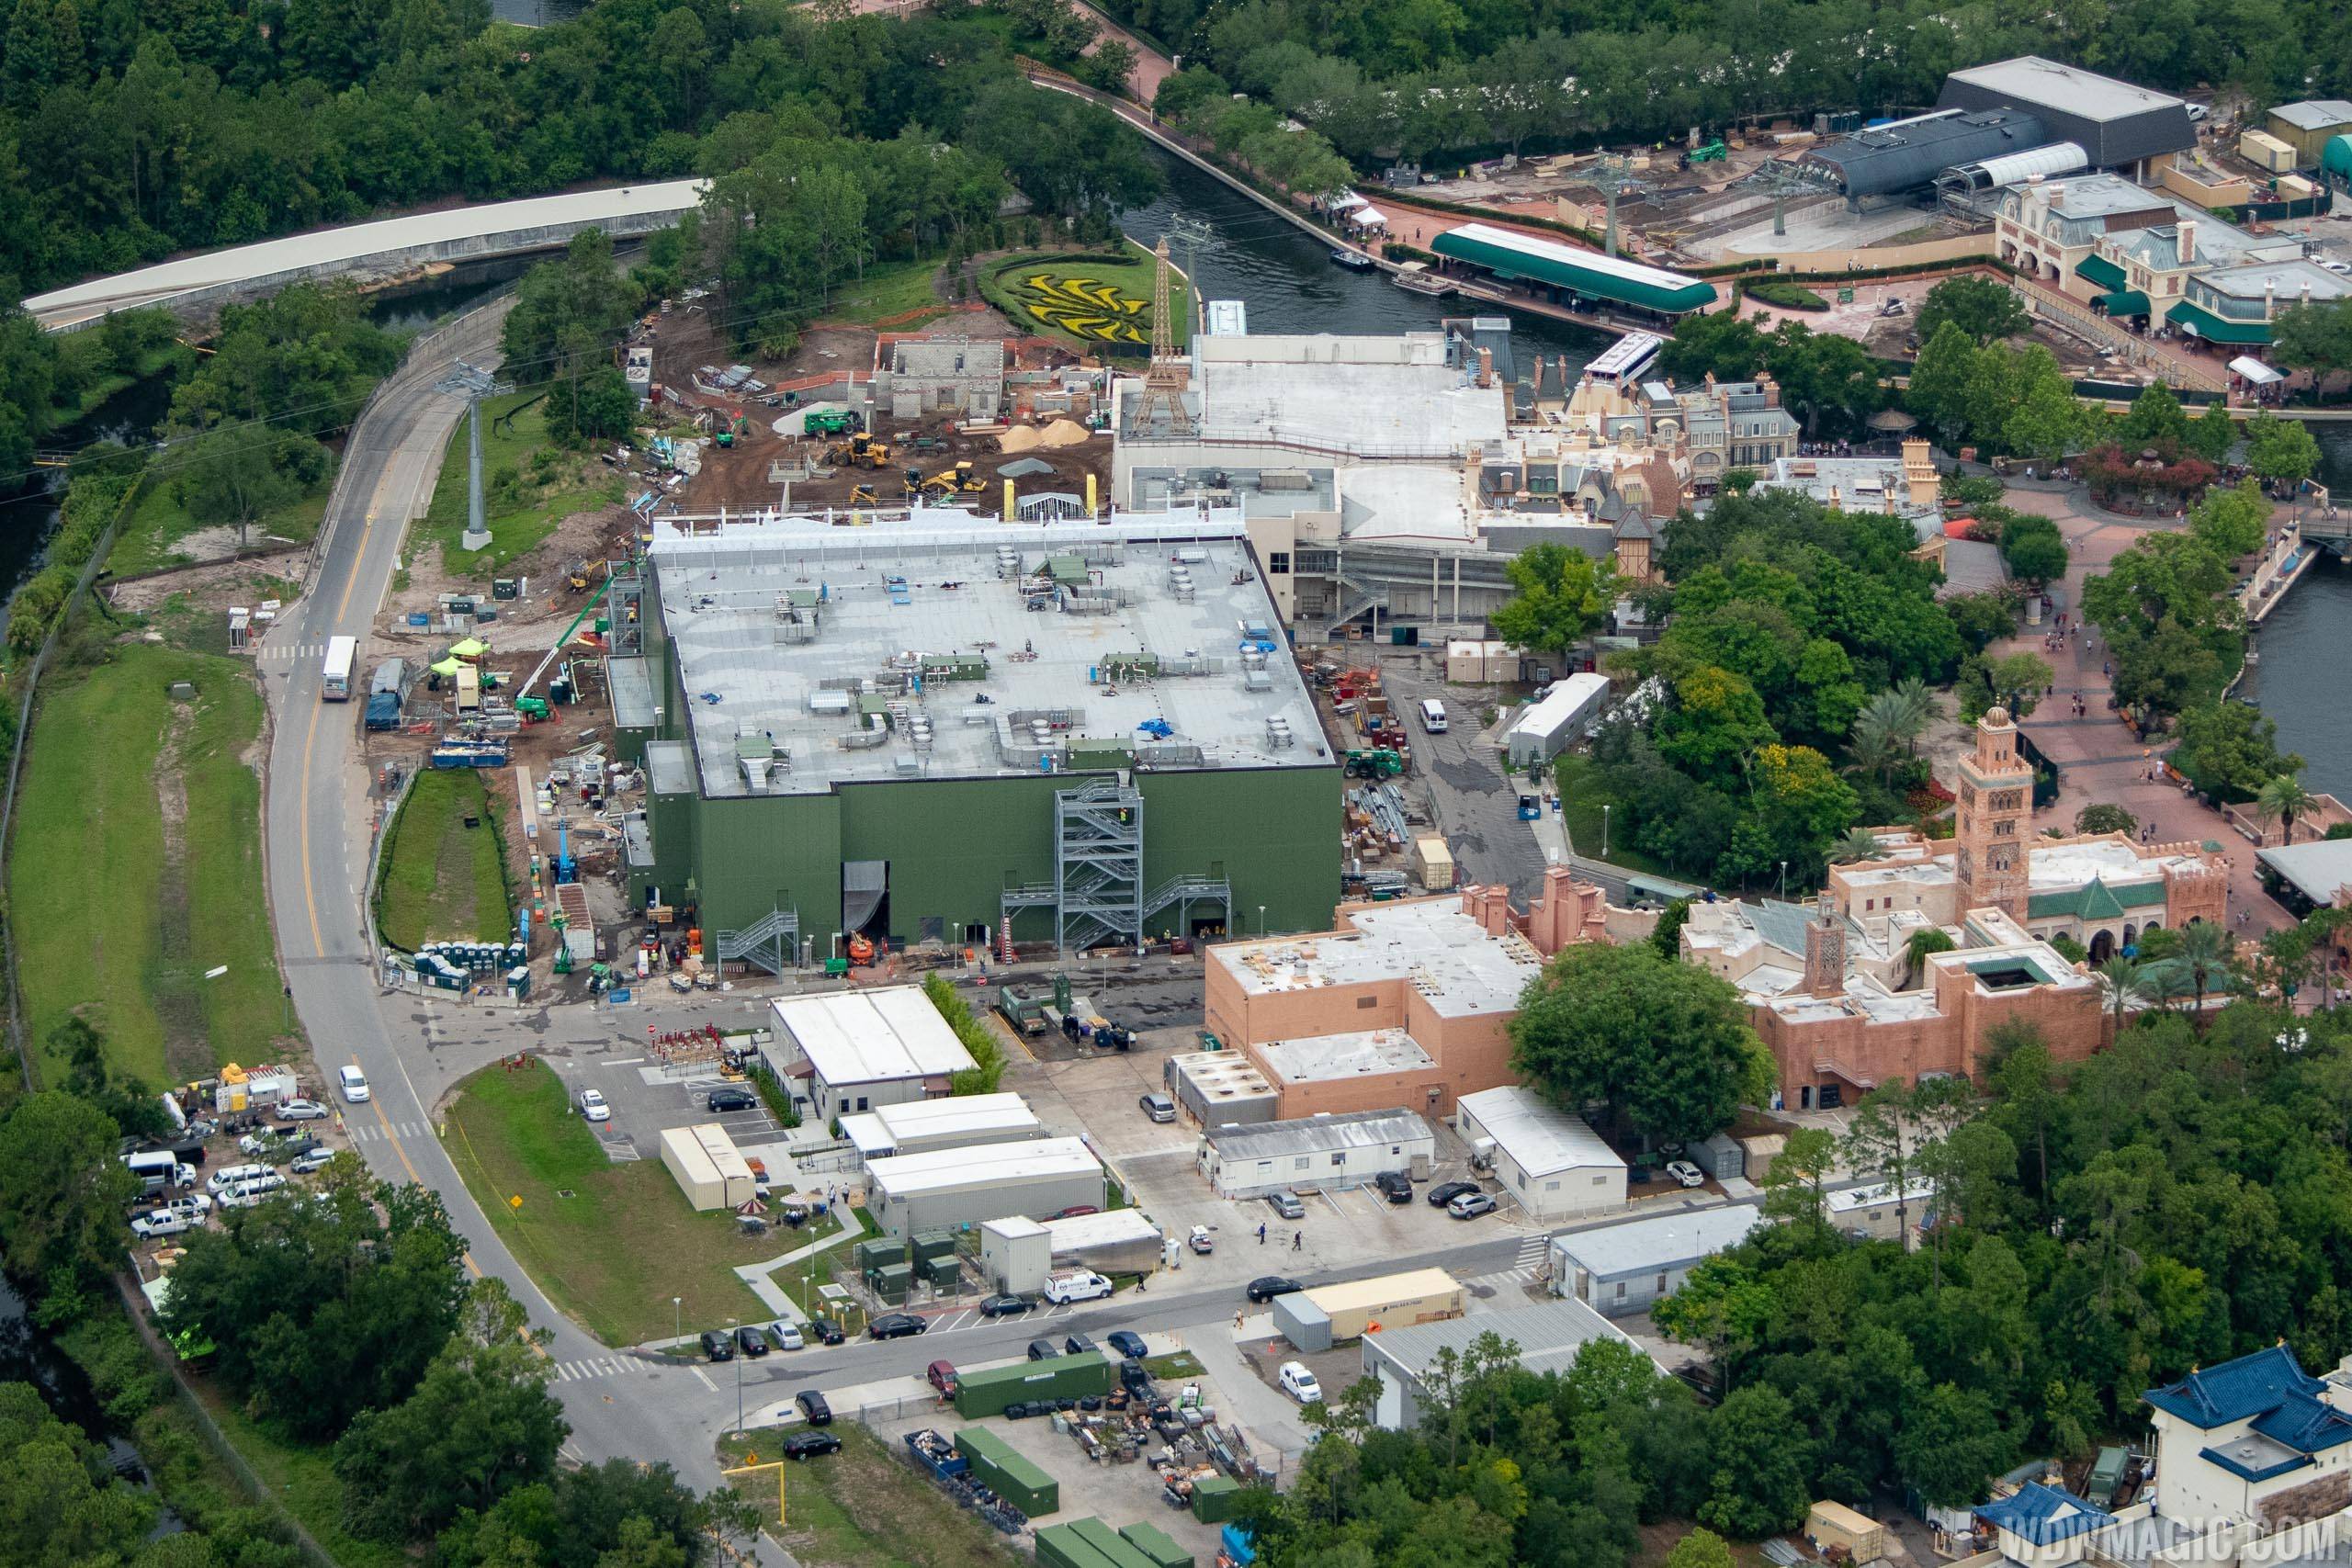 PHOTOS - Aerial view of Remy's Ratatouille Adventure under construction at Epcot